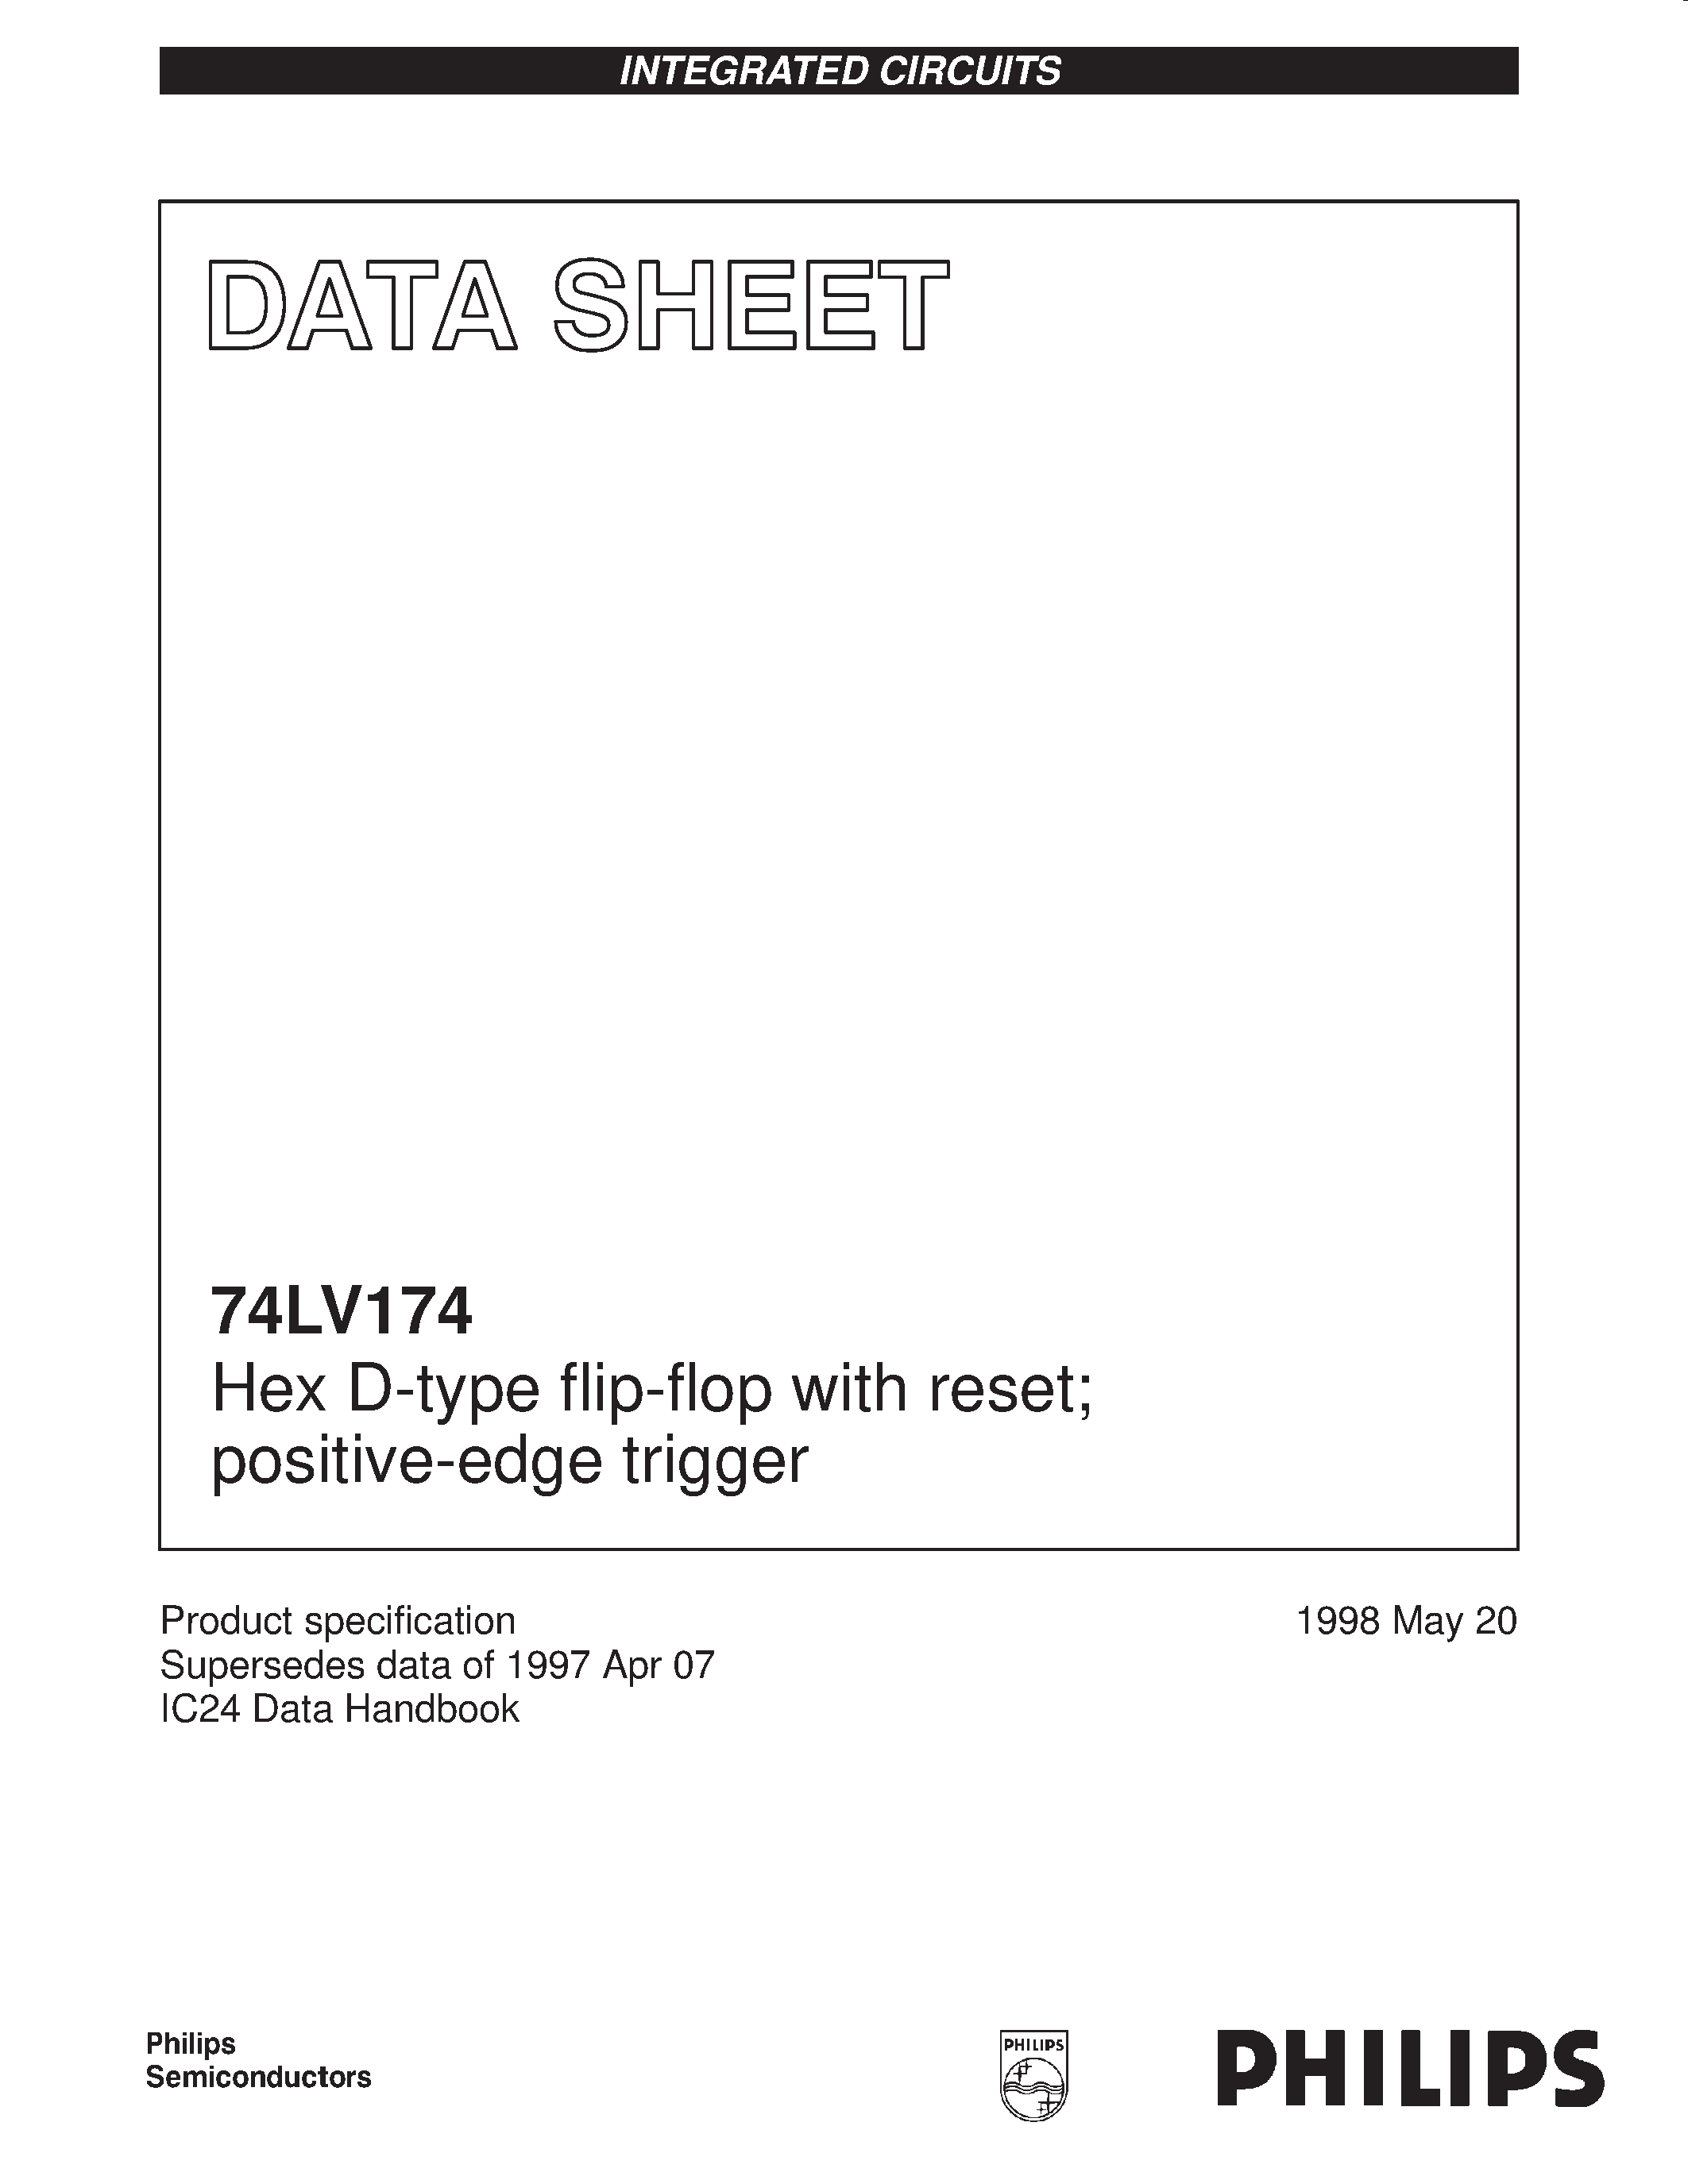 Datasheet 74LV174 - Hex D-type flip-flop with reset; positive-edge trigger page 1